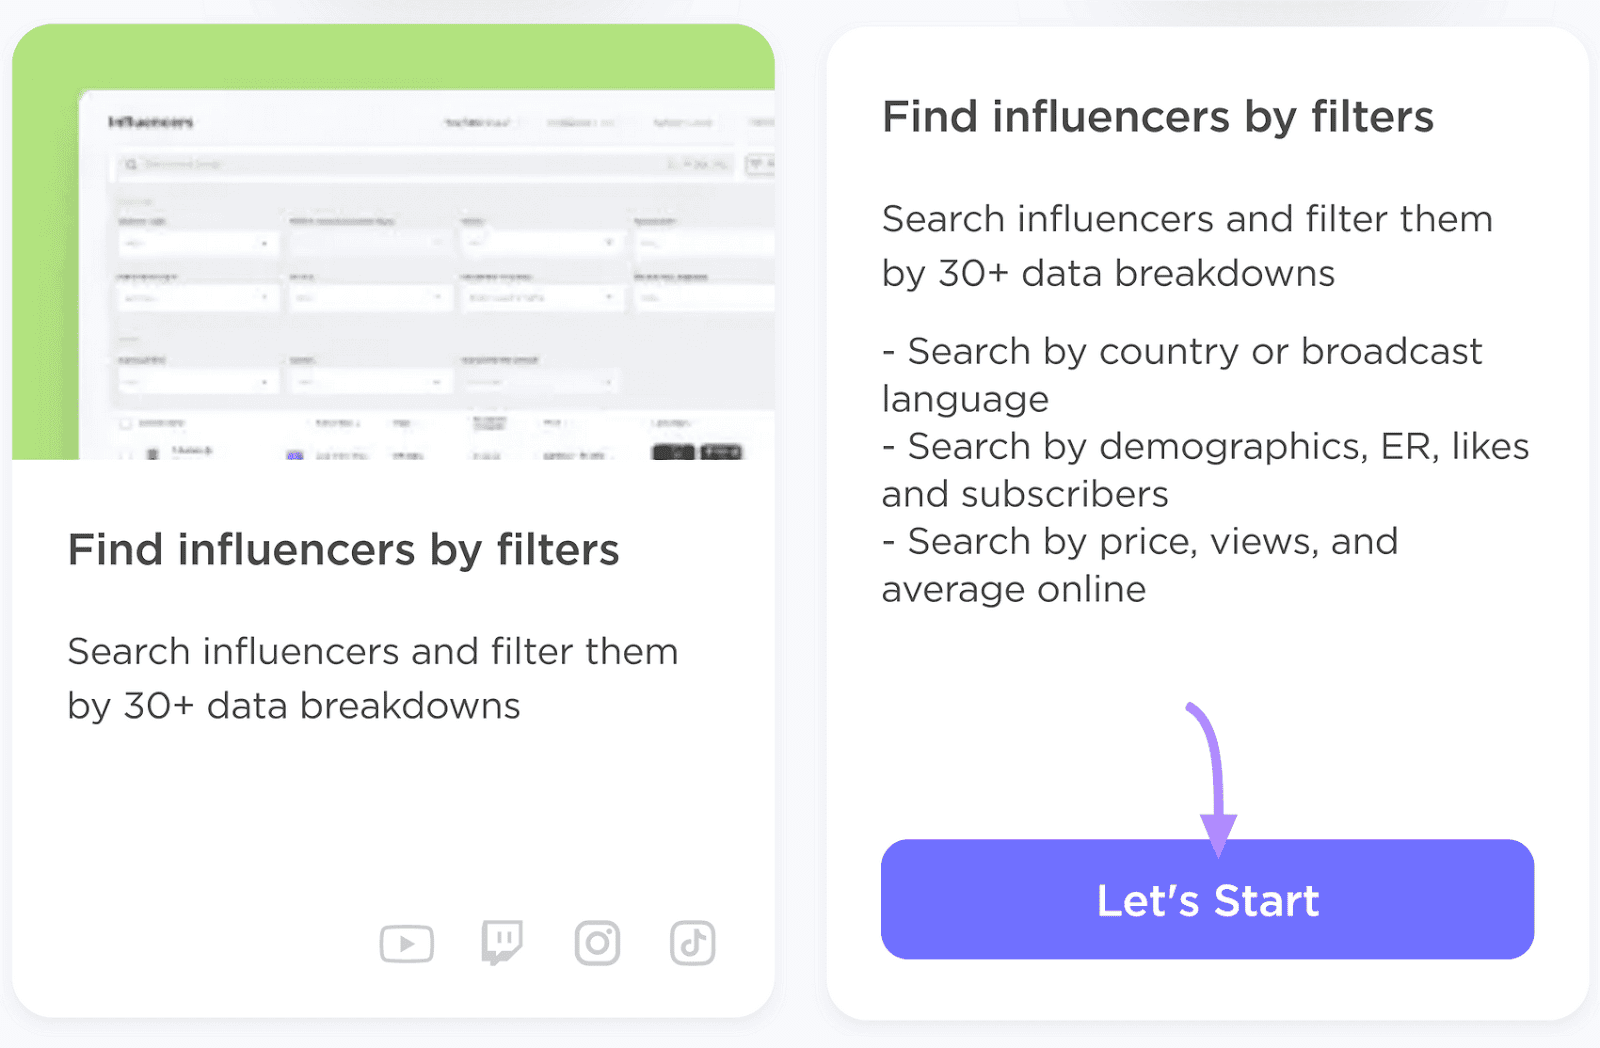 Two panels from the Influencer Analytics dashboard showing how to find influencers by filters, with a “Let’s Start” button.